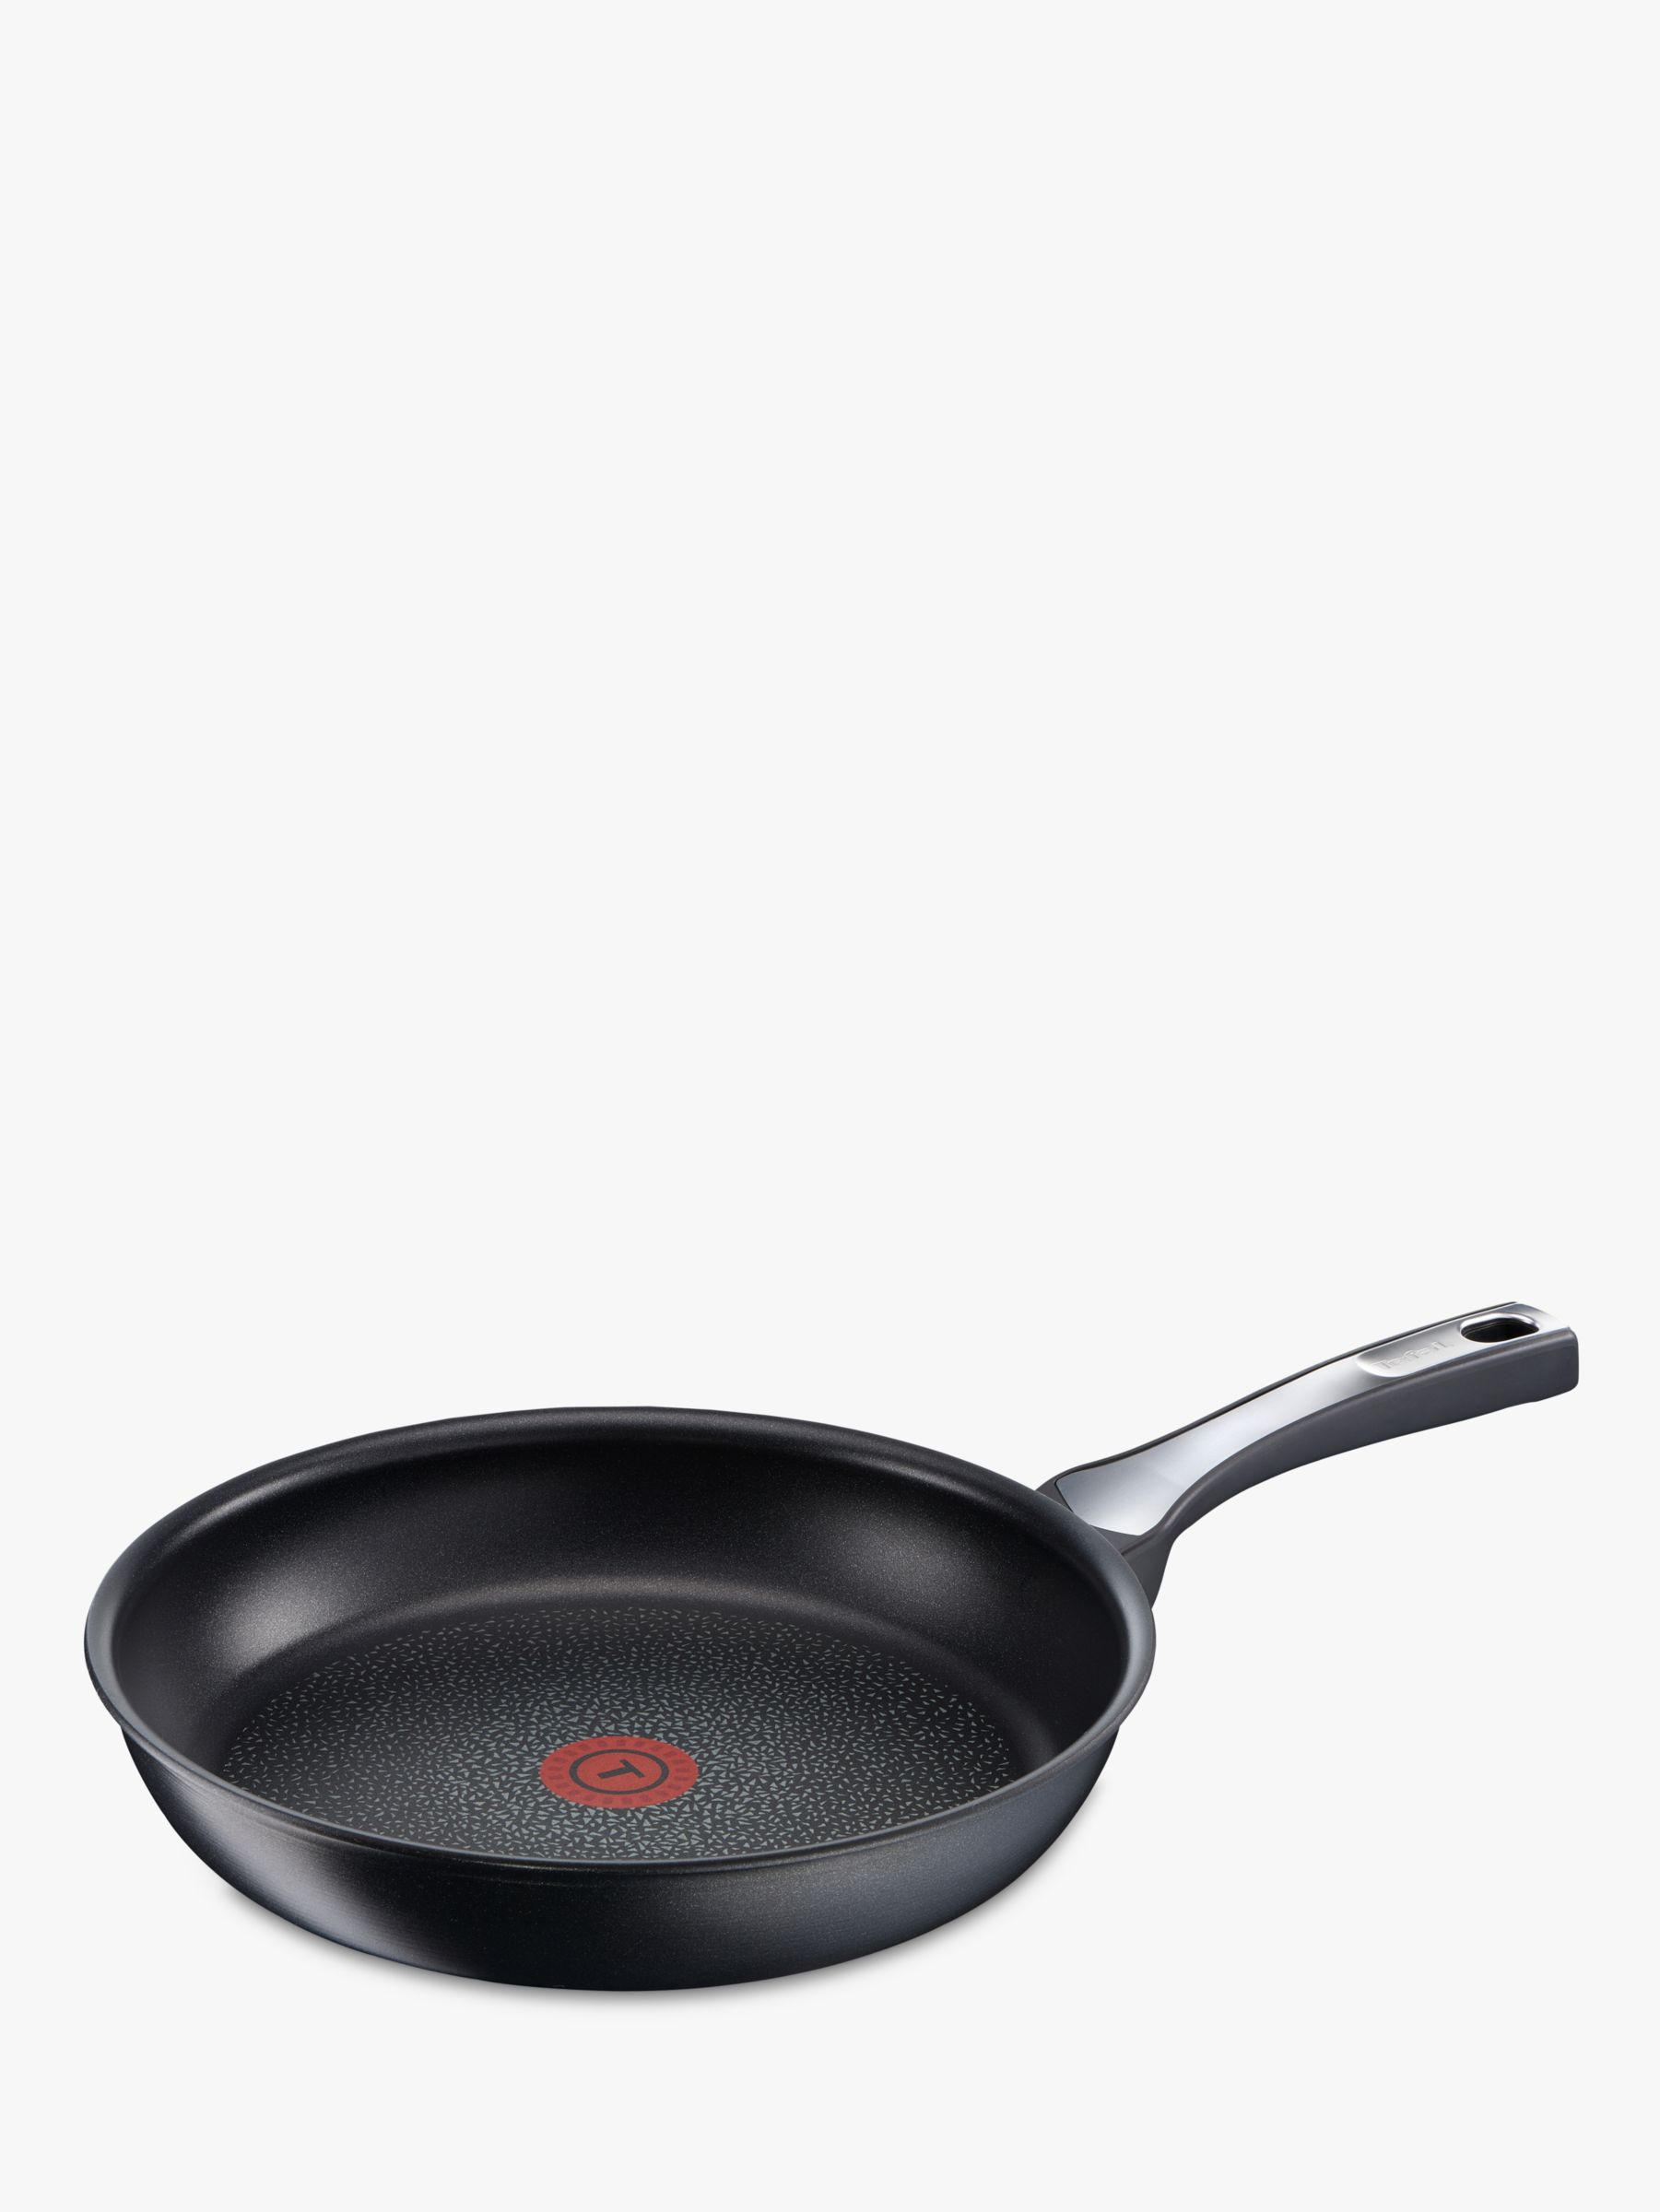 Tefal Expertise Non-Stick Frying Pan, 28cm